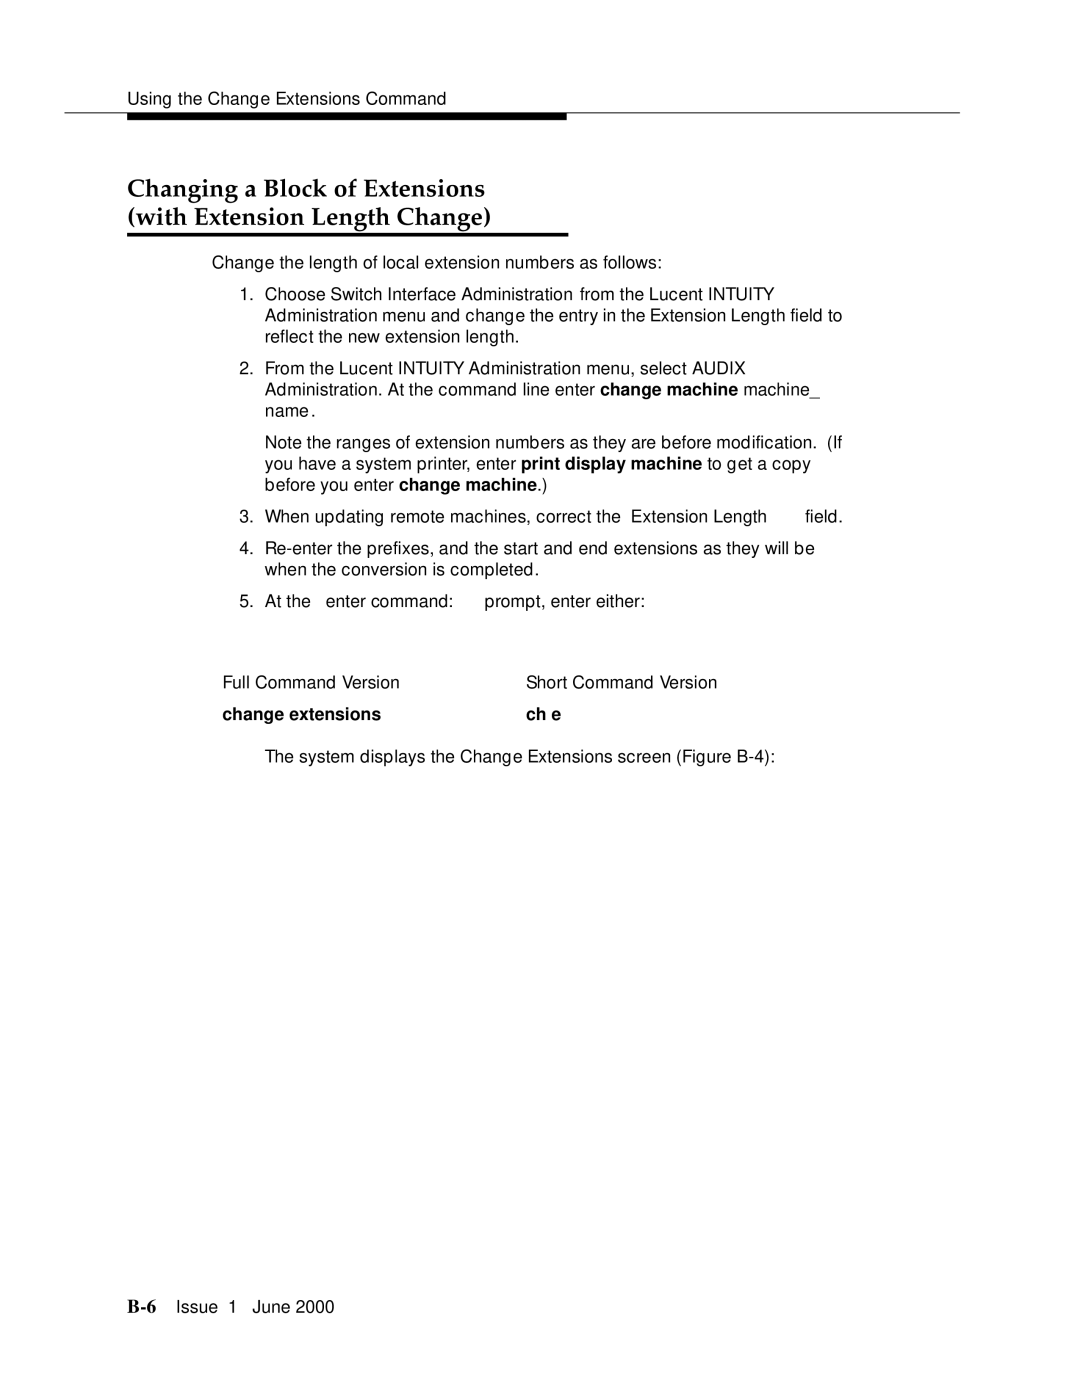 Lucent Technologies Release 3 manual Changing a Block of Extensions With Extension Length Change, Change extensions Ch e 